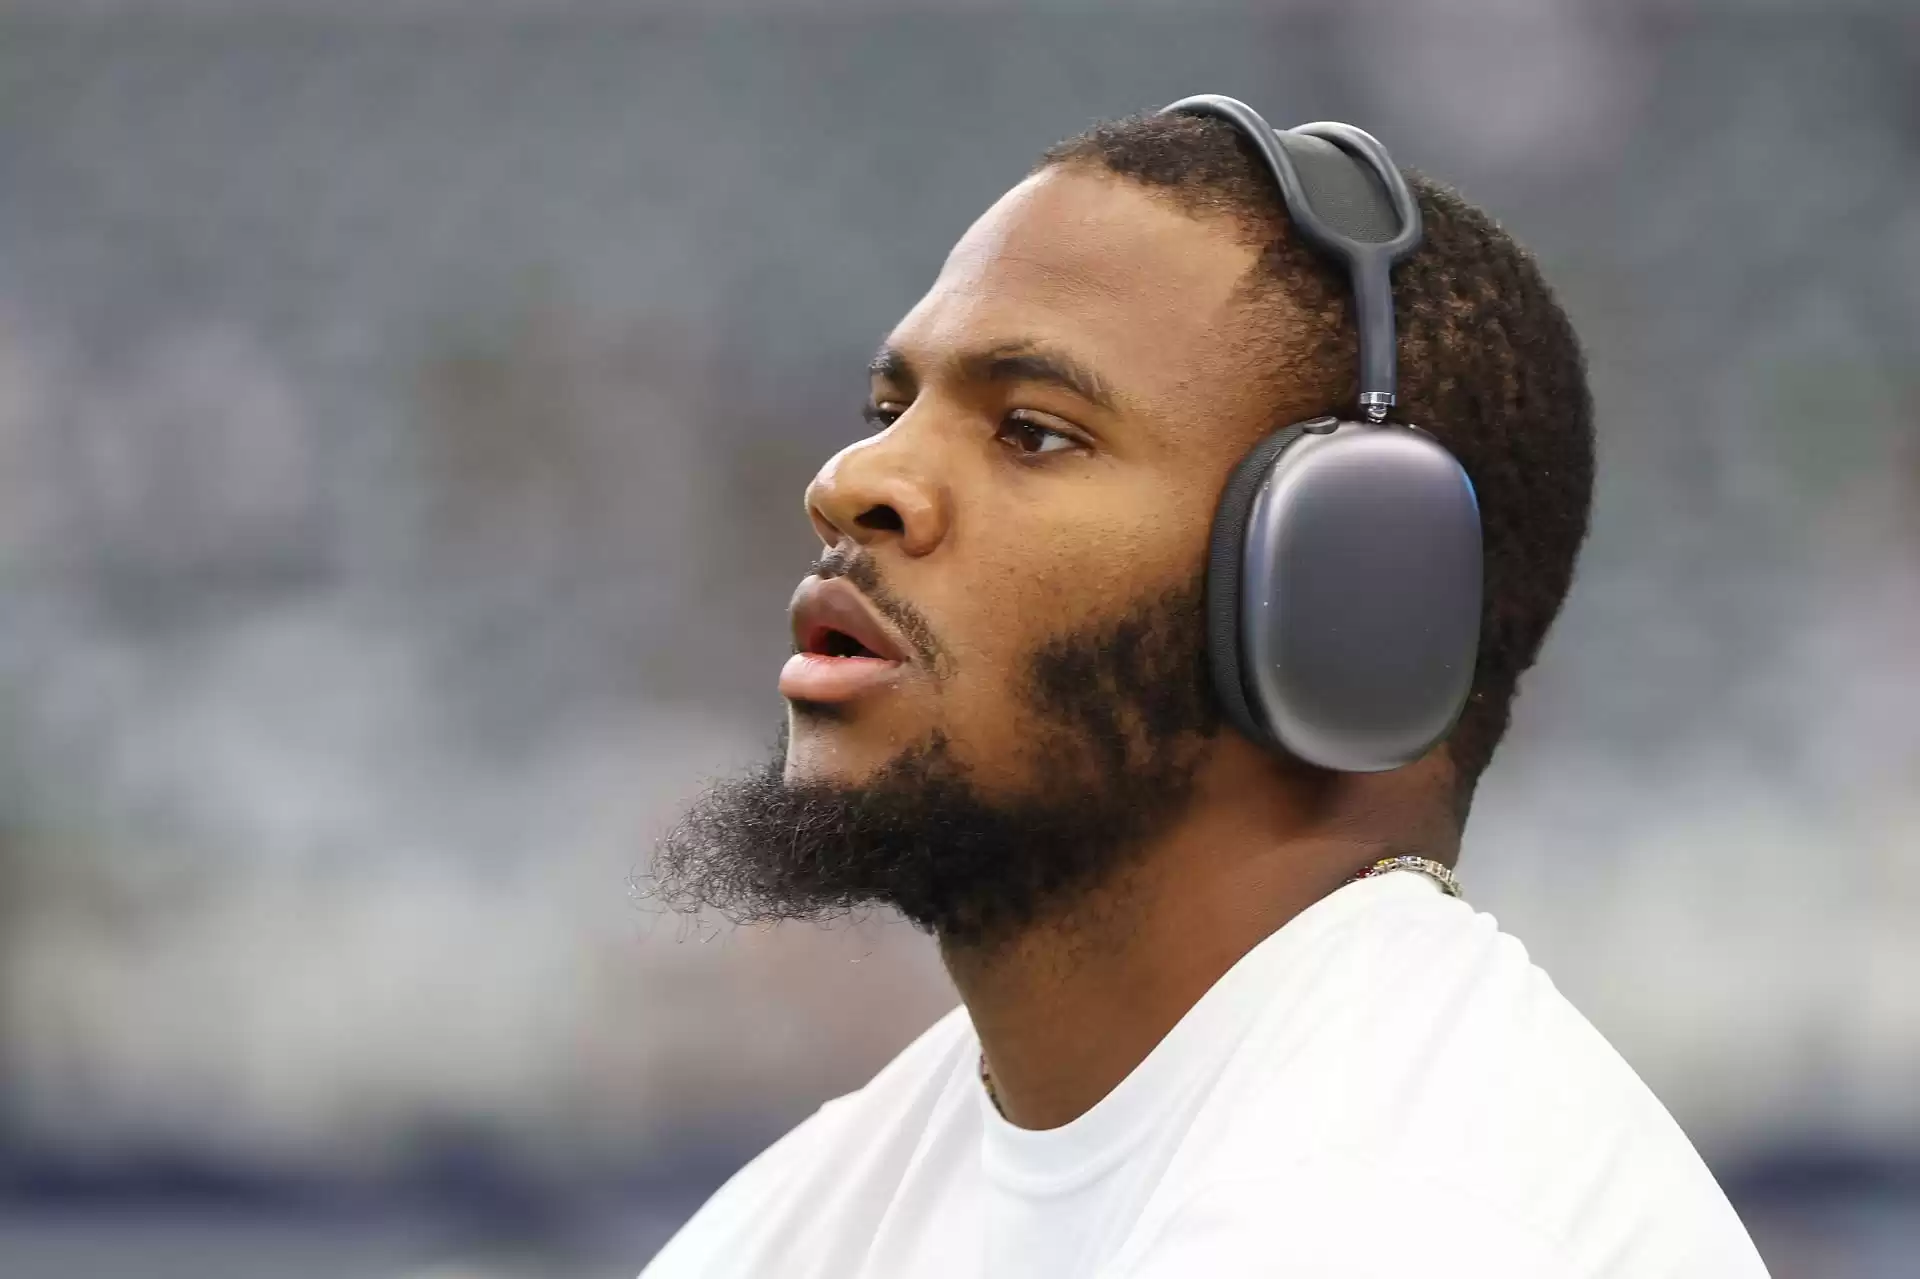 "HAND HIM THAT MVP AND DPOY" - Cowboys fans hype up Micah Parsons after sensational performance vs. Jets